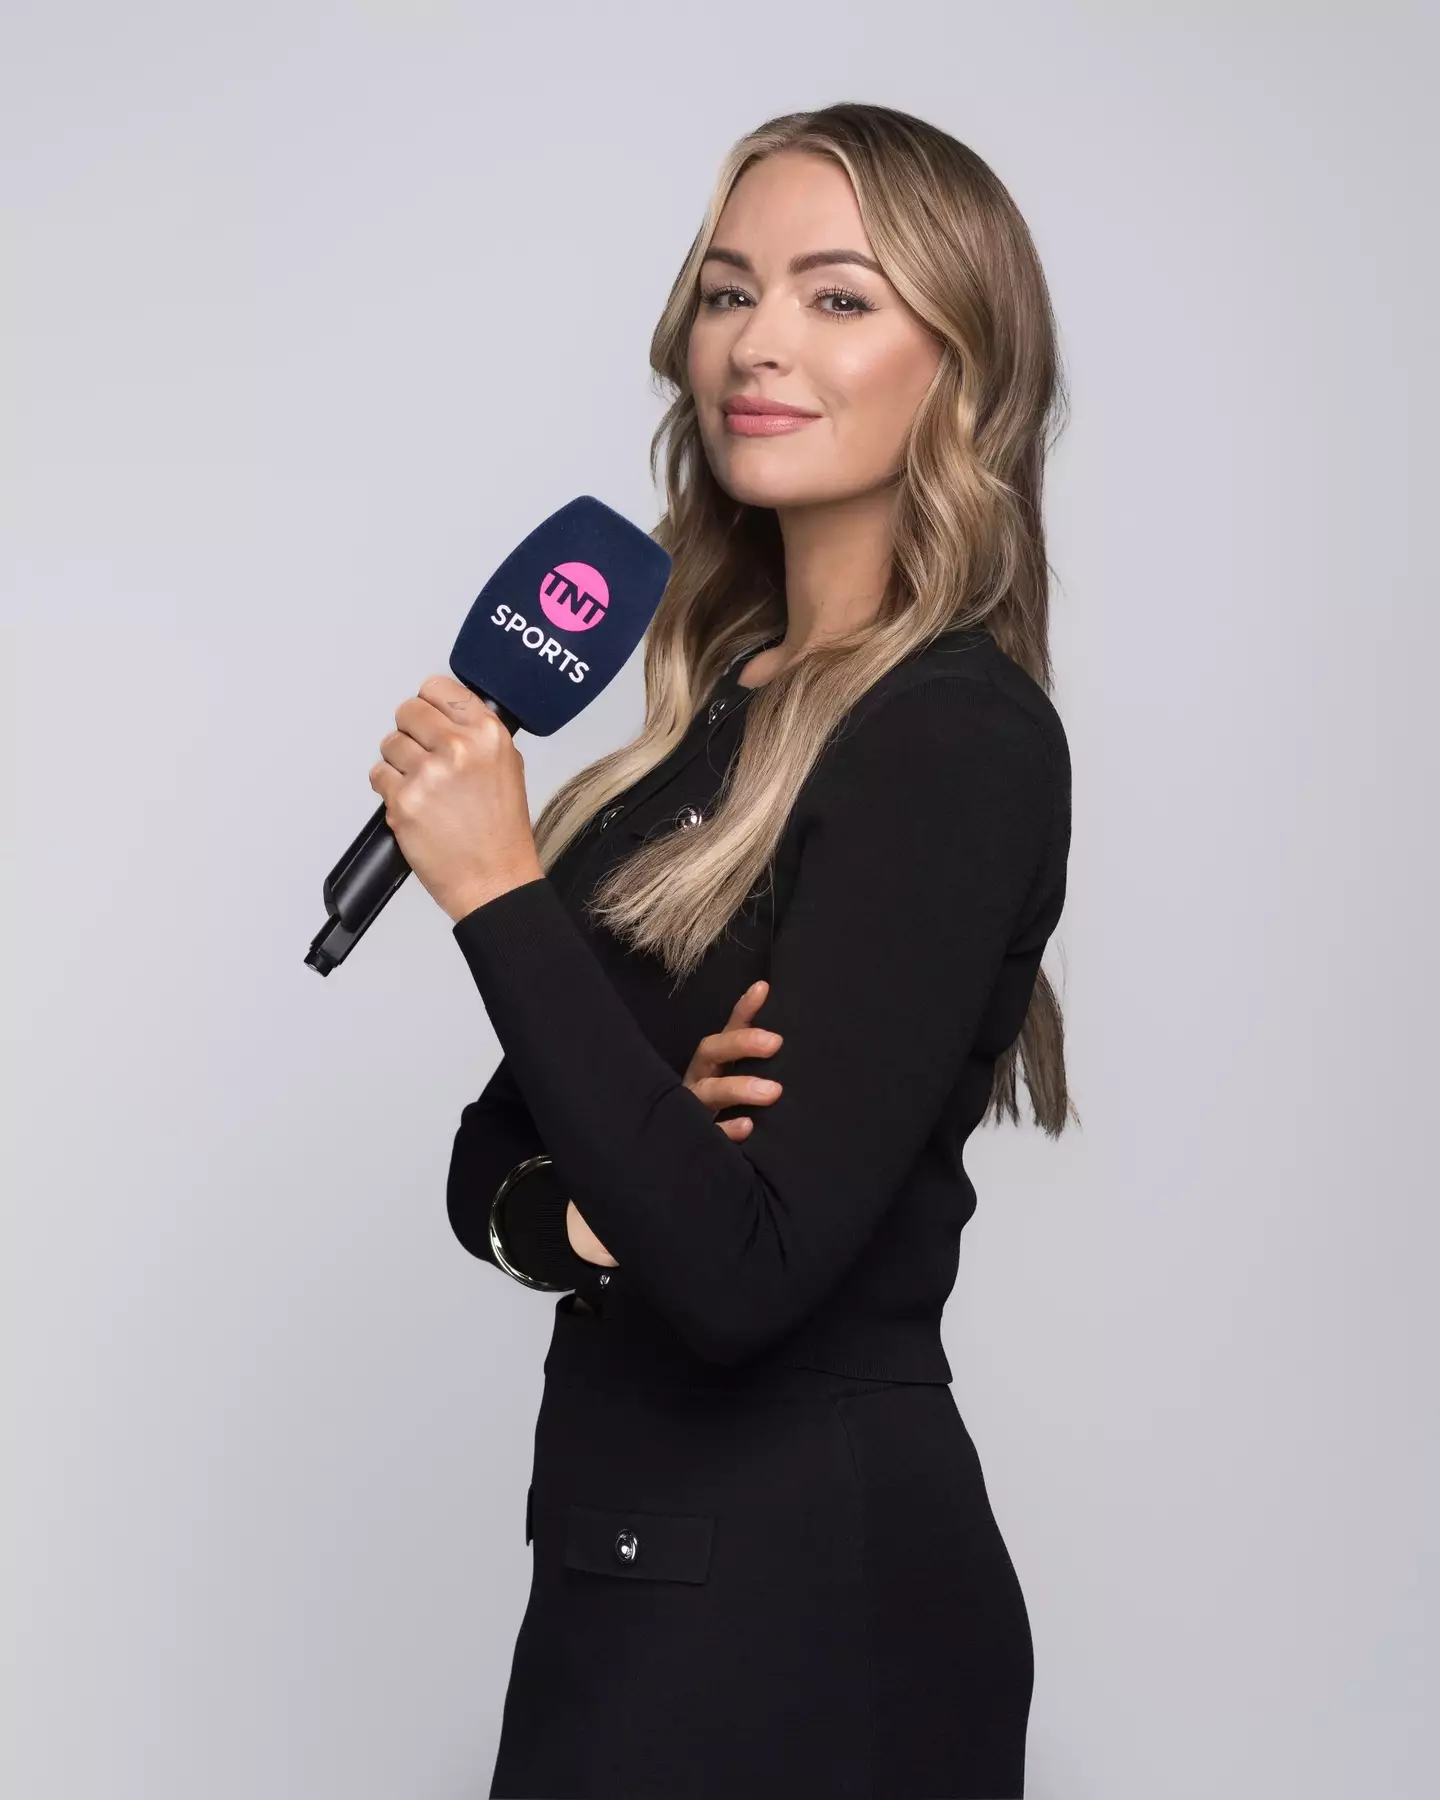 Laura Woods is set to present TNT Sports' Champions League and boxing coverage (TNT Sports)